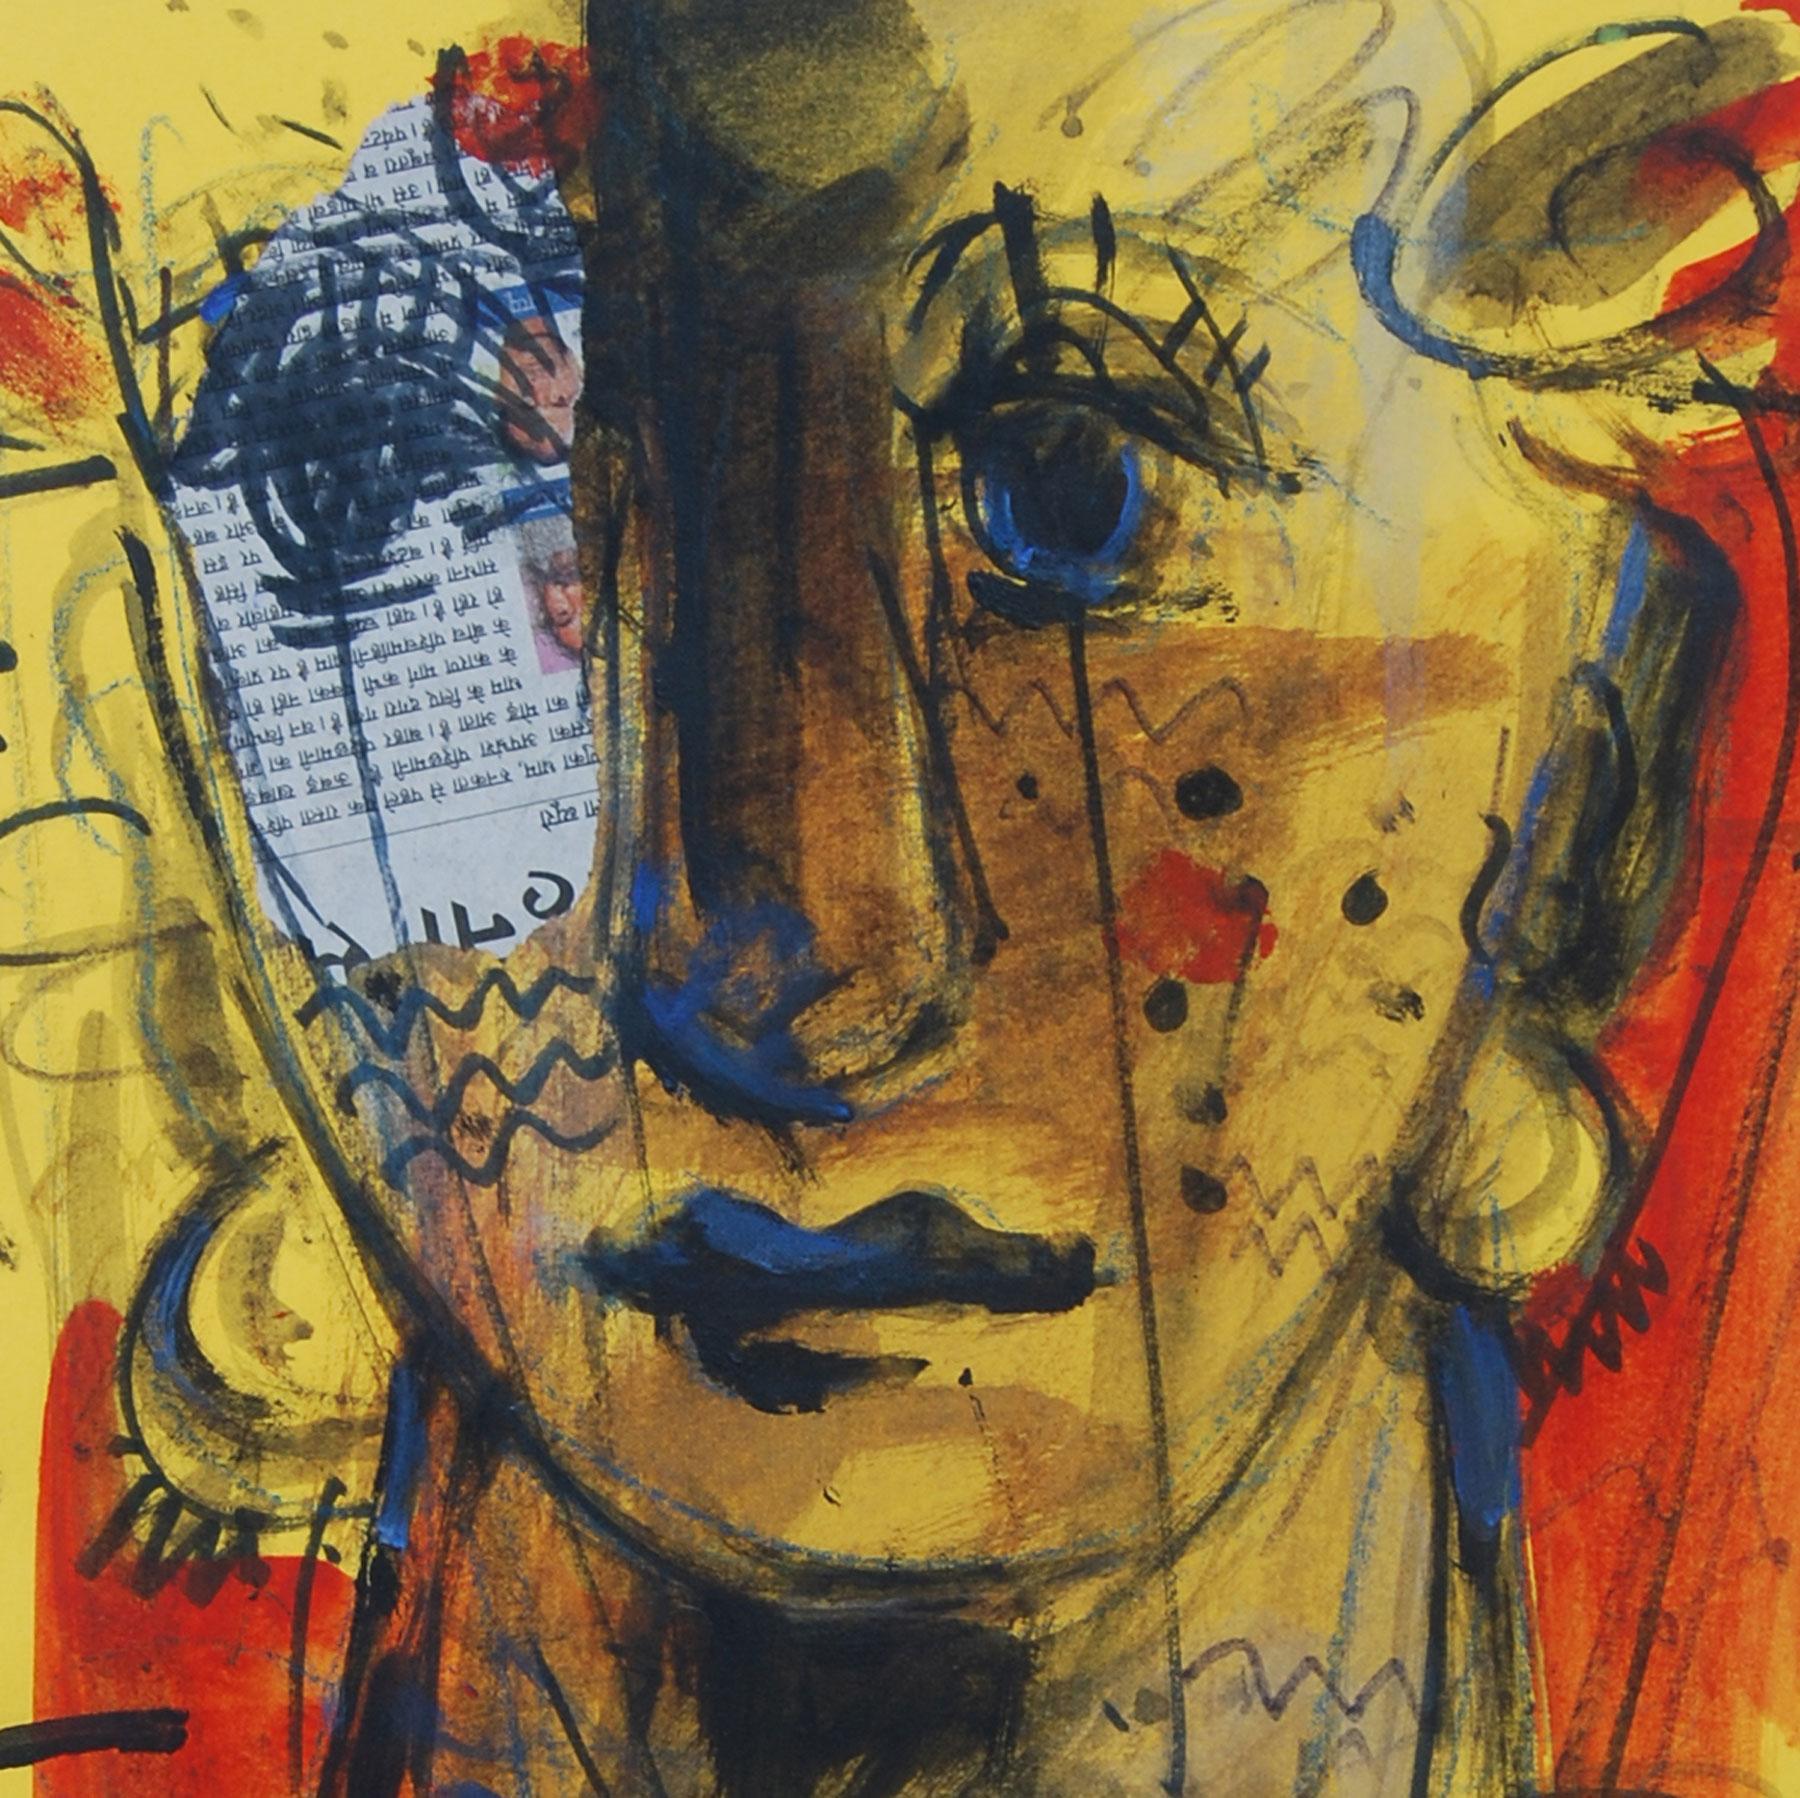 Face, Expression, Mood, Depicting Calmness, Mixed Media, Indian Artist